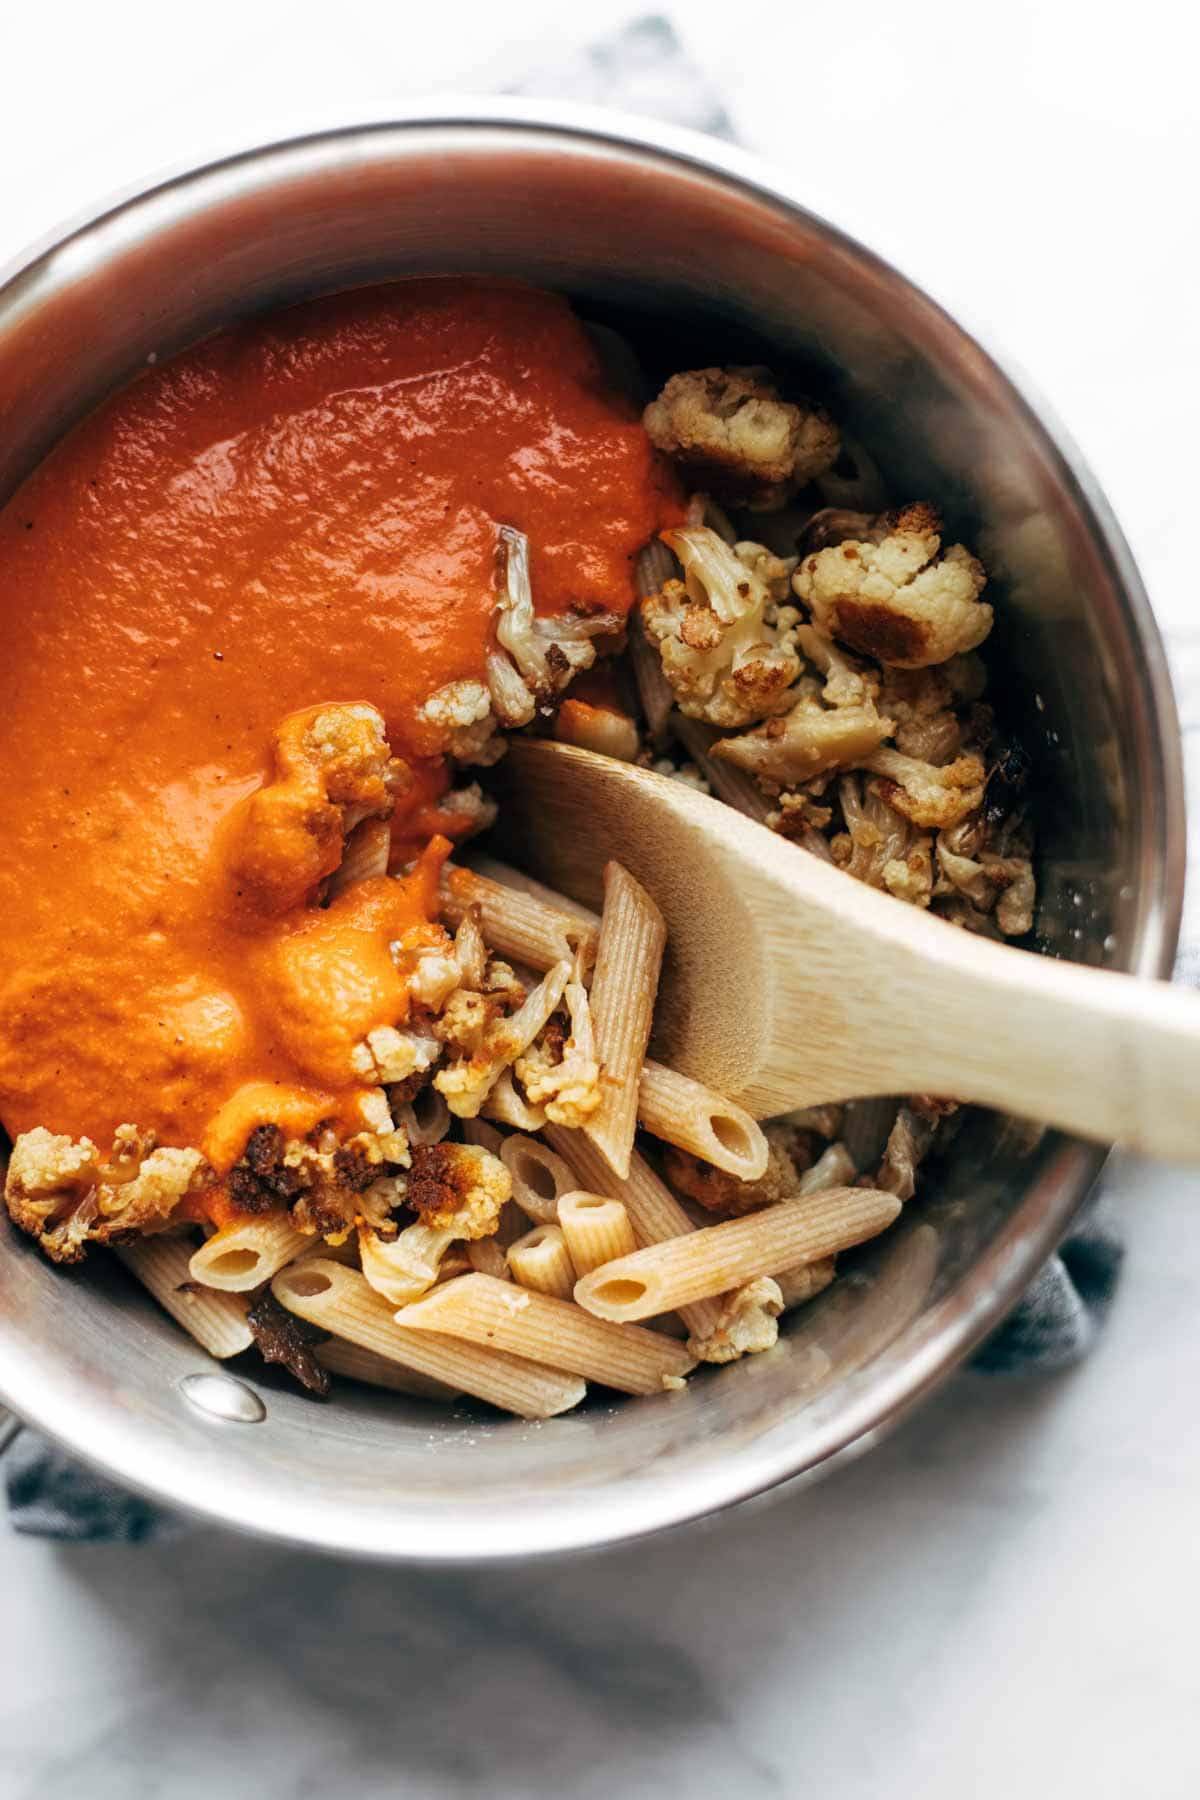 Mixing ingredients for Red Pepper Cashew Pasta in a mixing bowl with a wooden spoon.